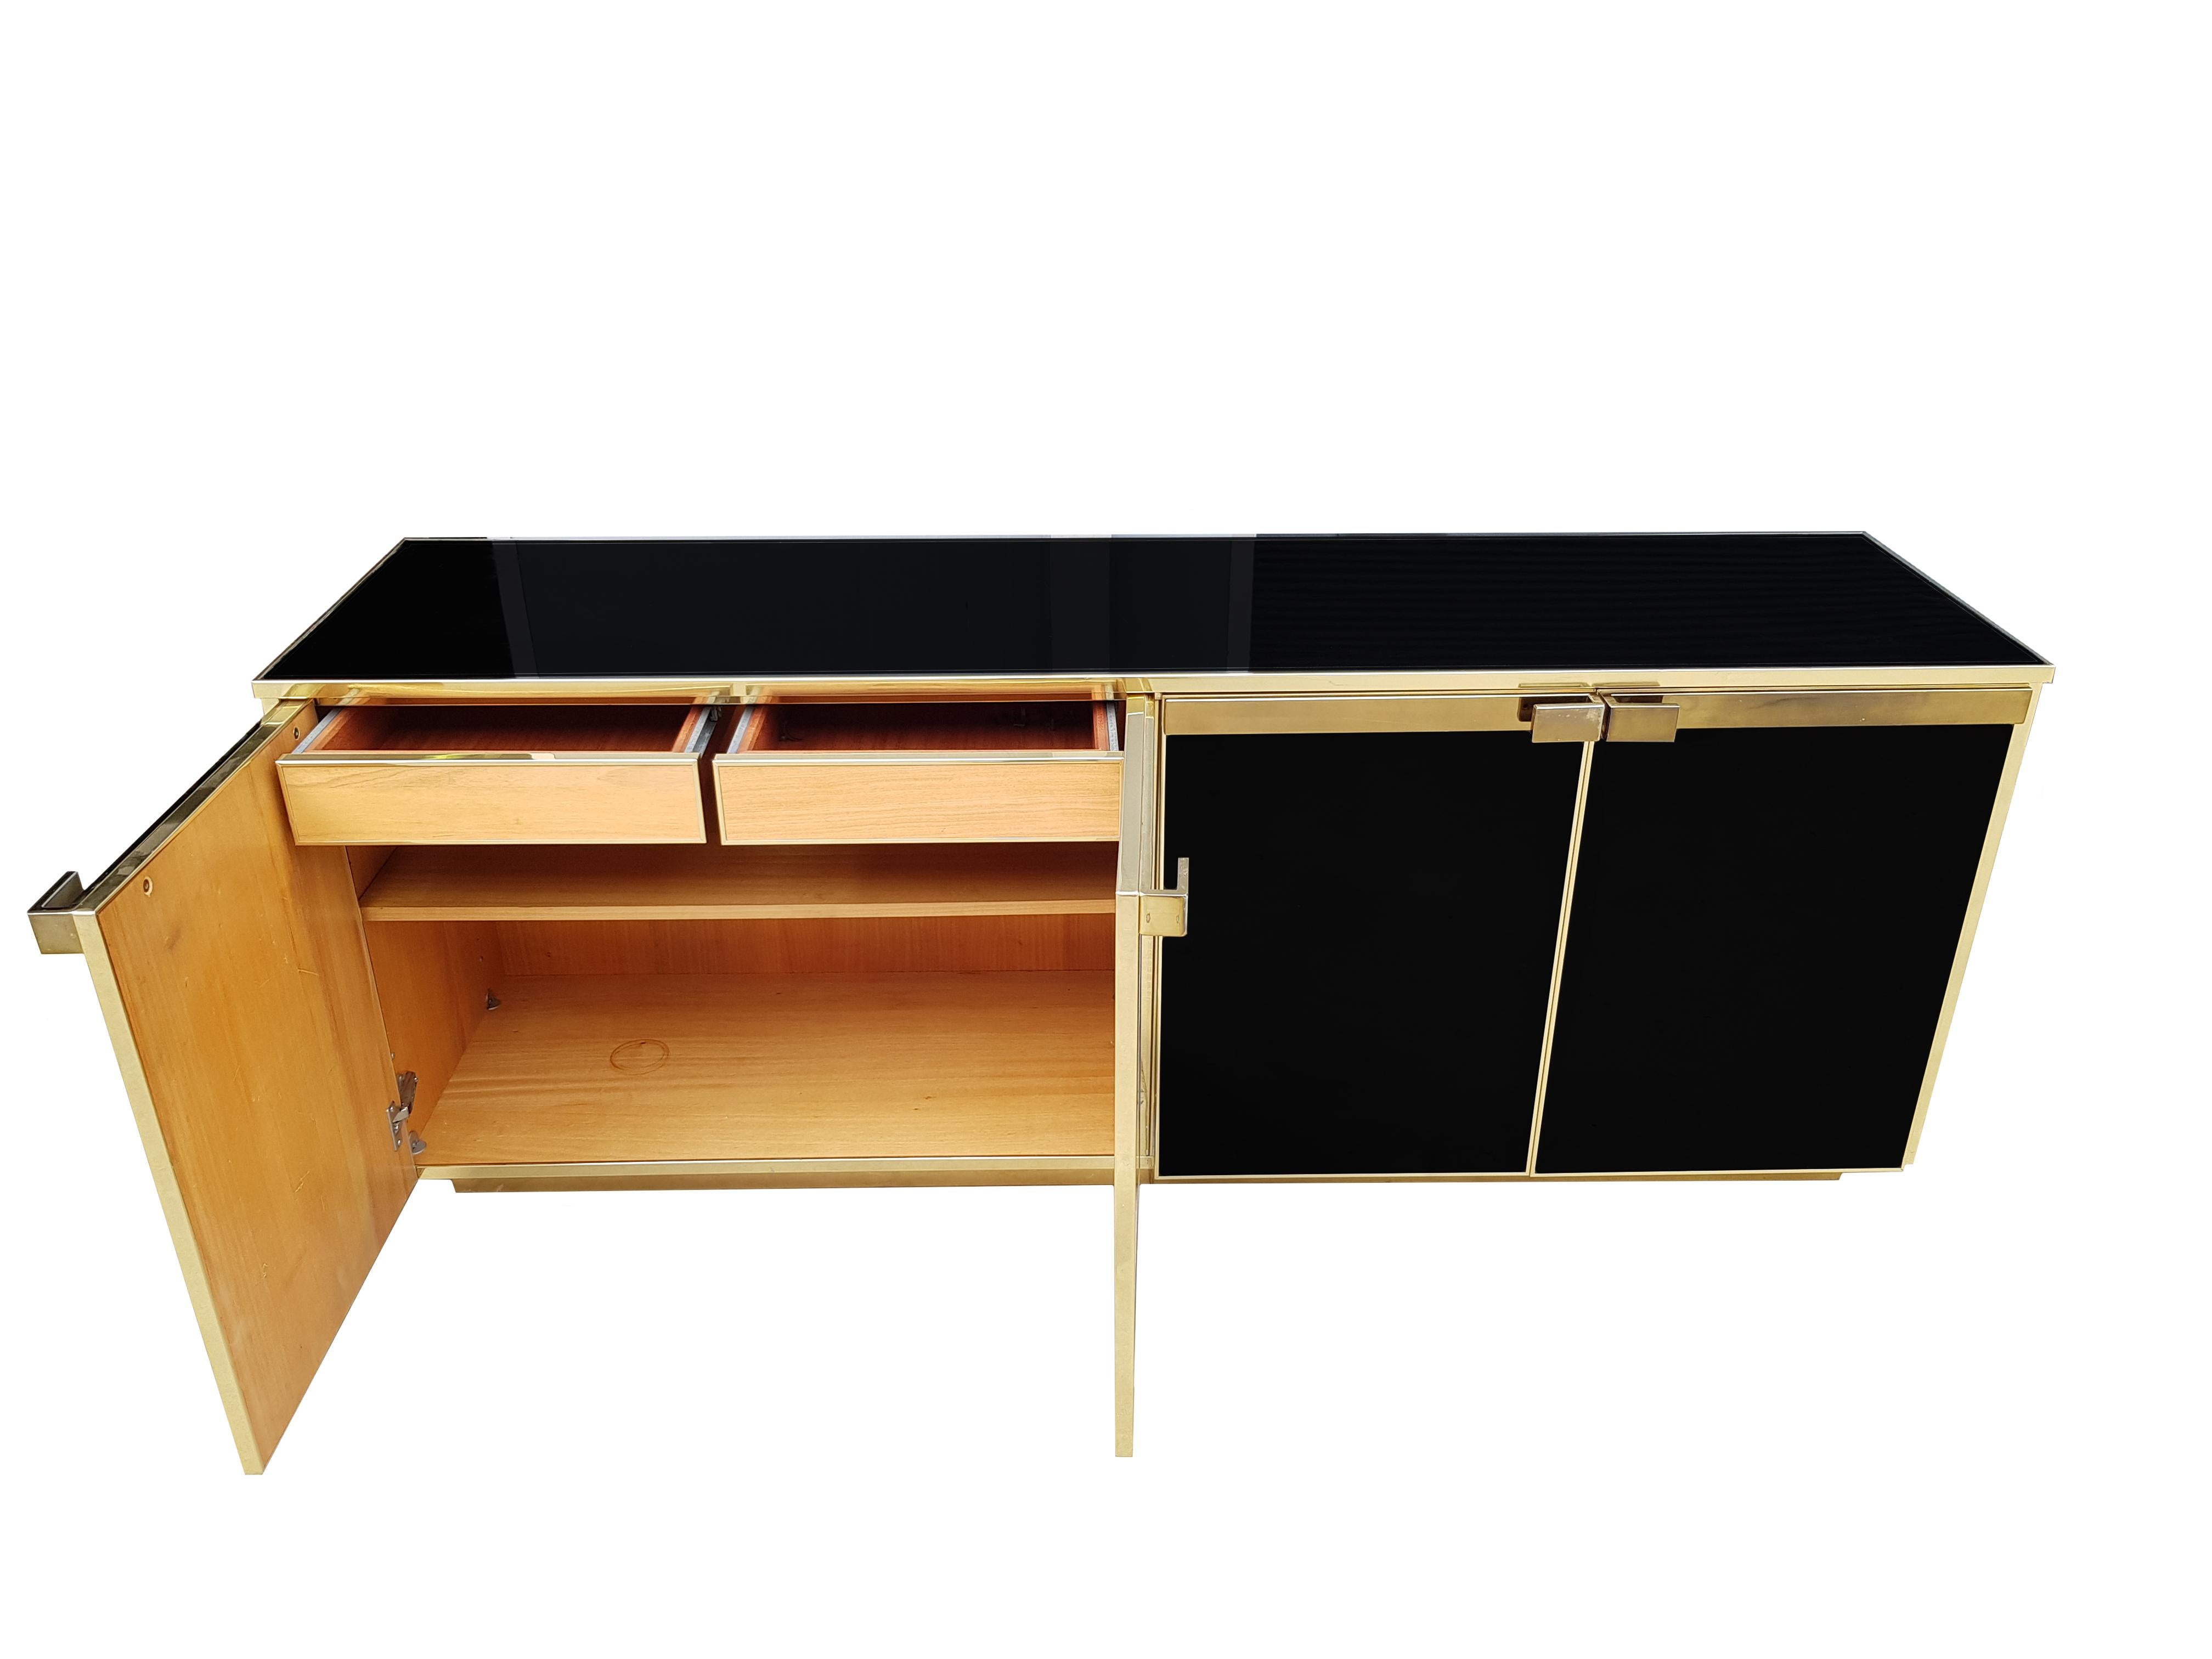 Black Glass, Brass Detailed Credenza In Excellent Condition For Sale In De Klinge, BE